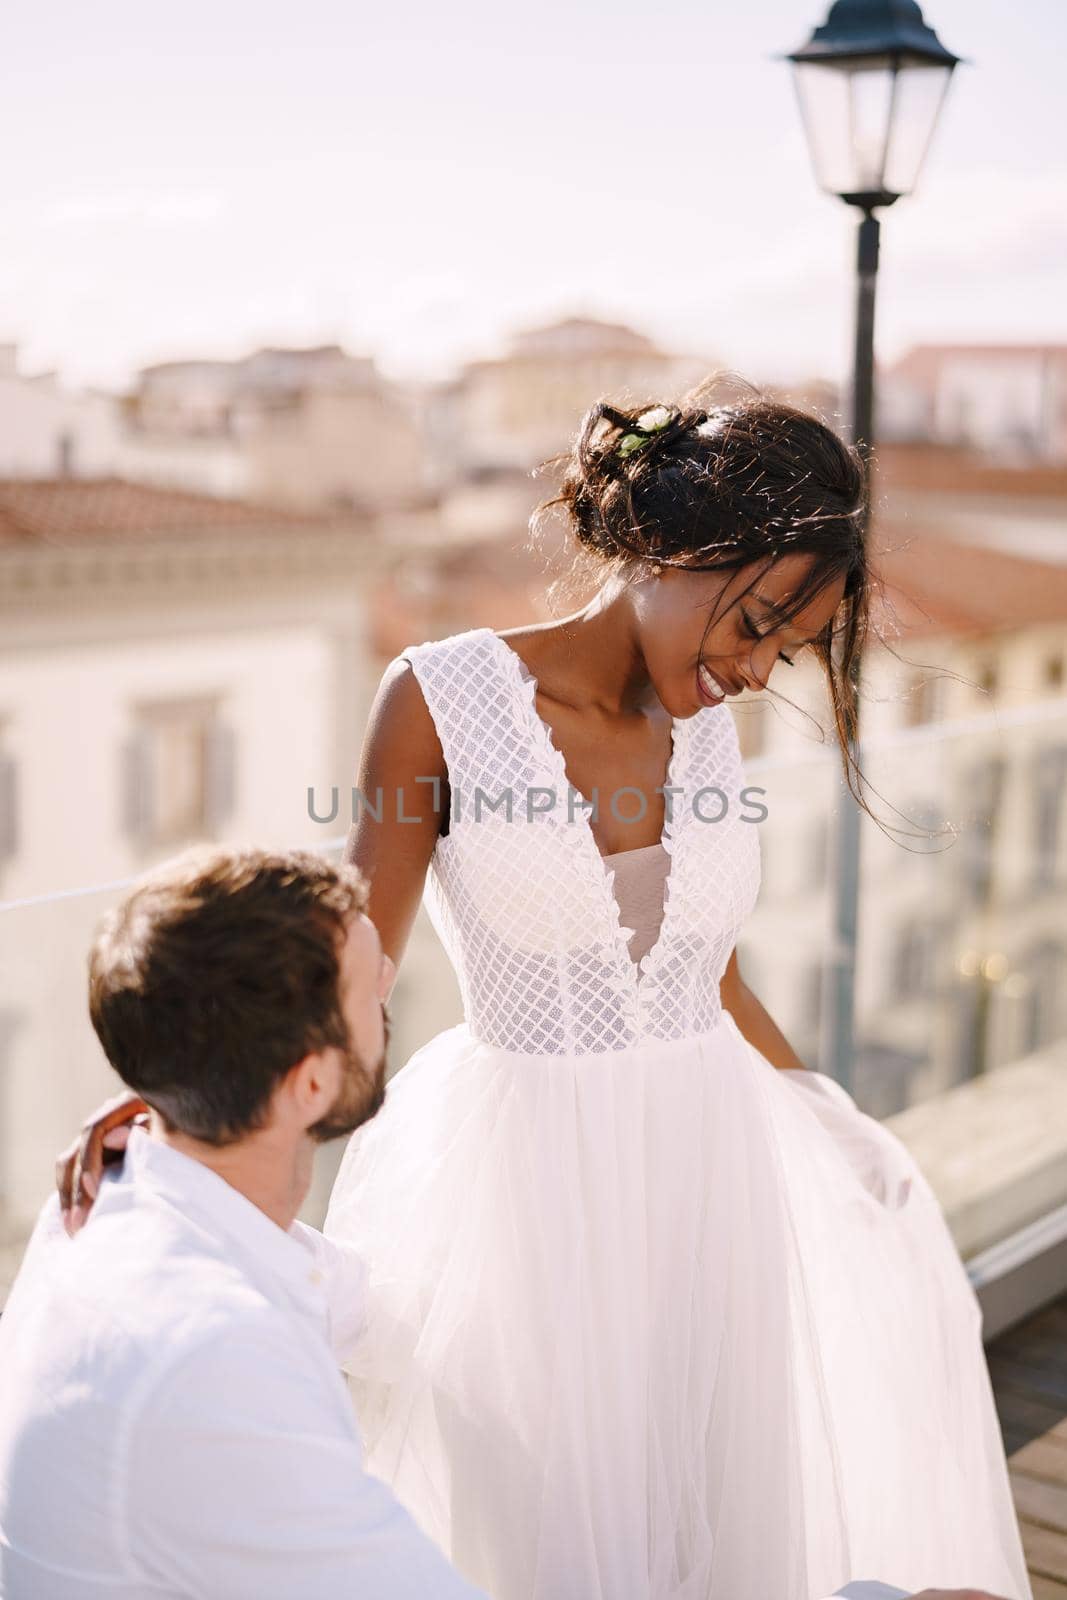 Interracial wedding couple. Destination fine-art wedding in Florence, Italy. African-American bride and Caucasian groom dance near the table for a wedding dinner, on the roof of the restaurant.